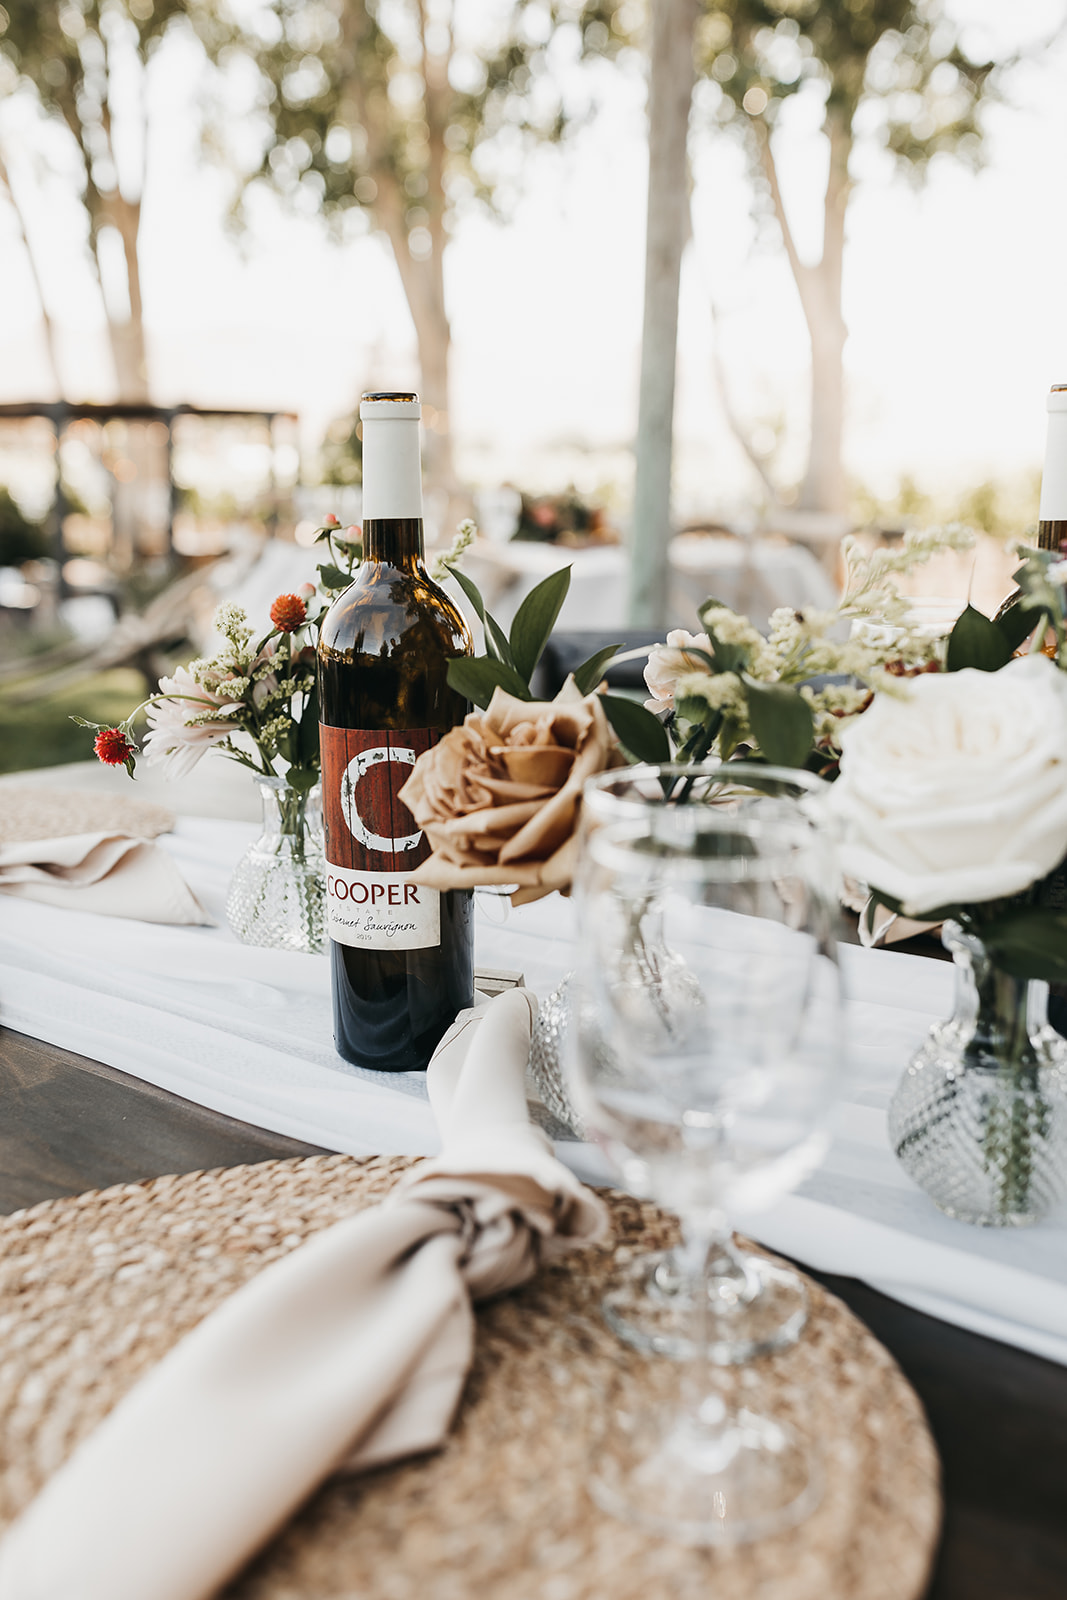 Stunning wedding details and florals by Simplified Celebrations at Cooper Wine Company wedding in Washington